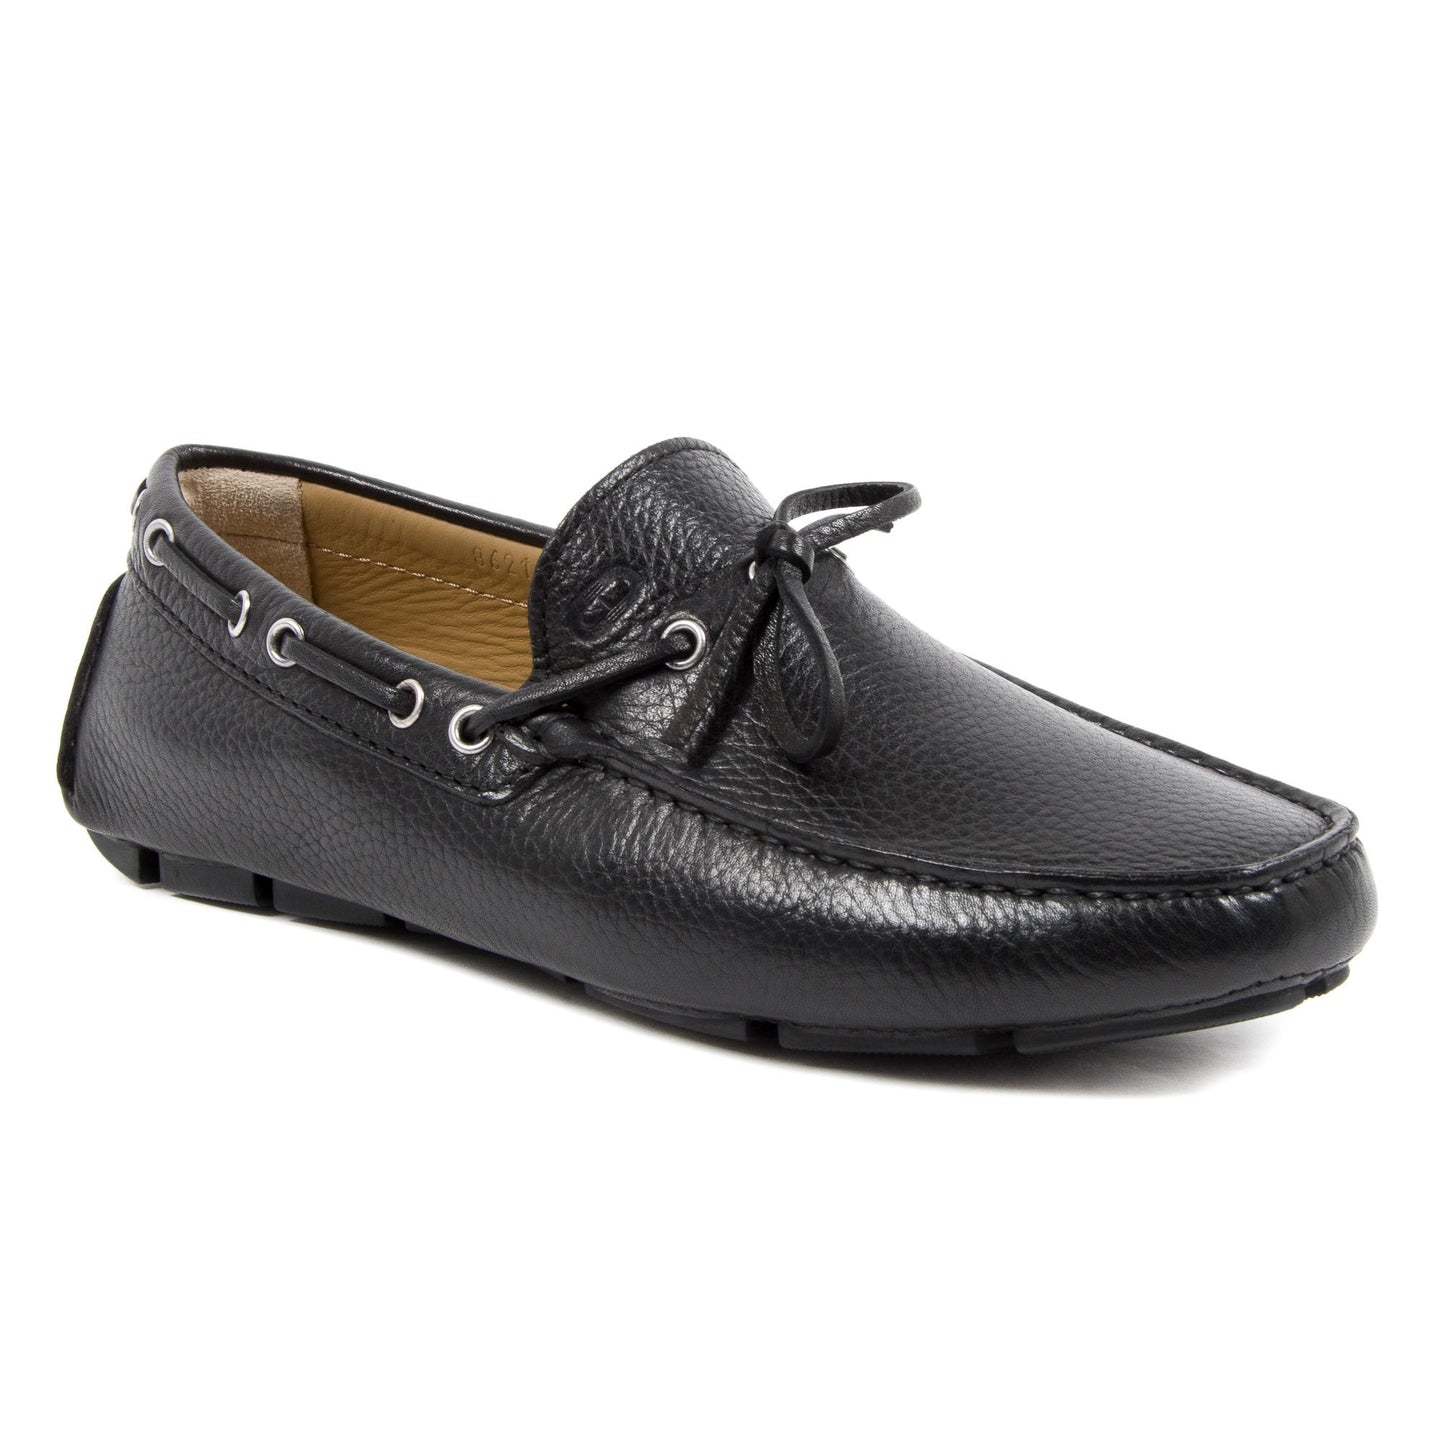 Mousse Prefisso Loafer